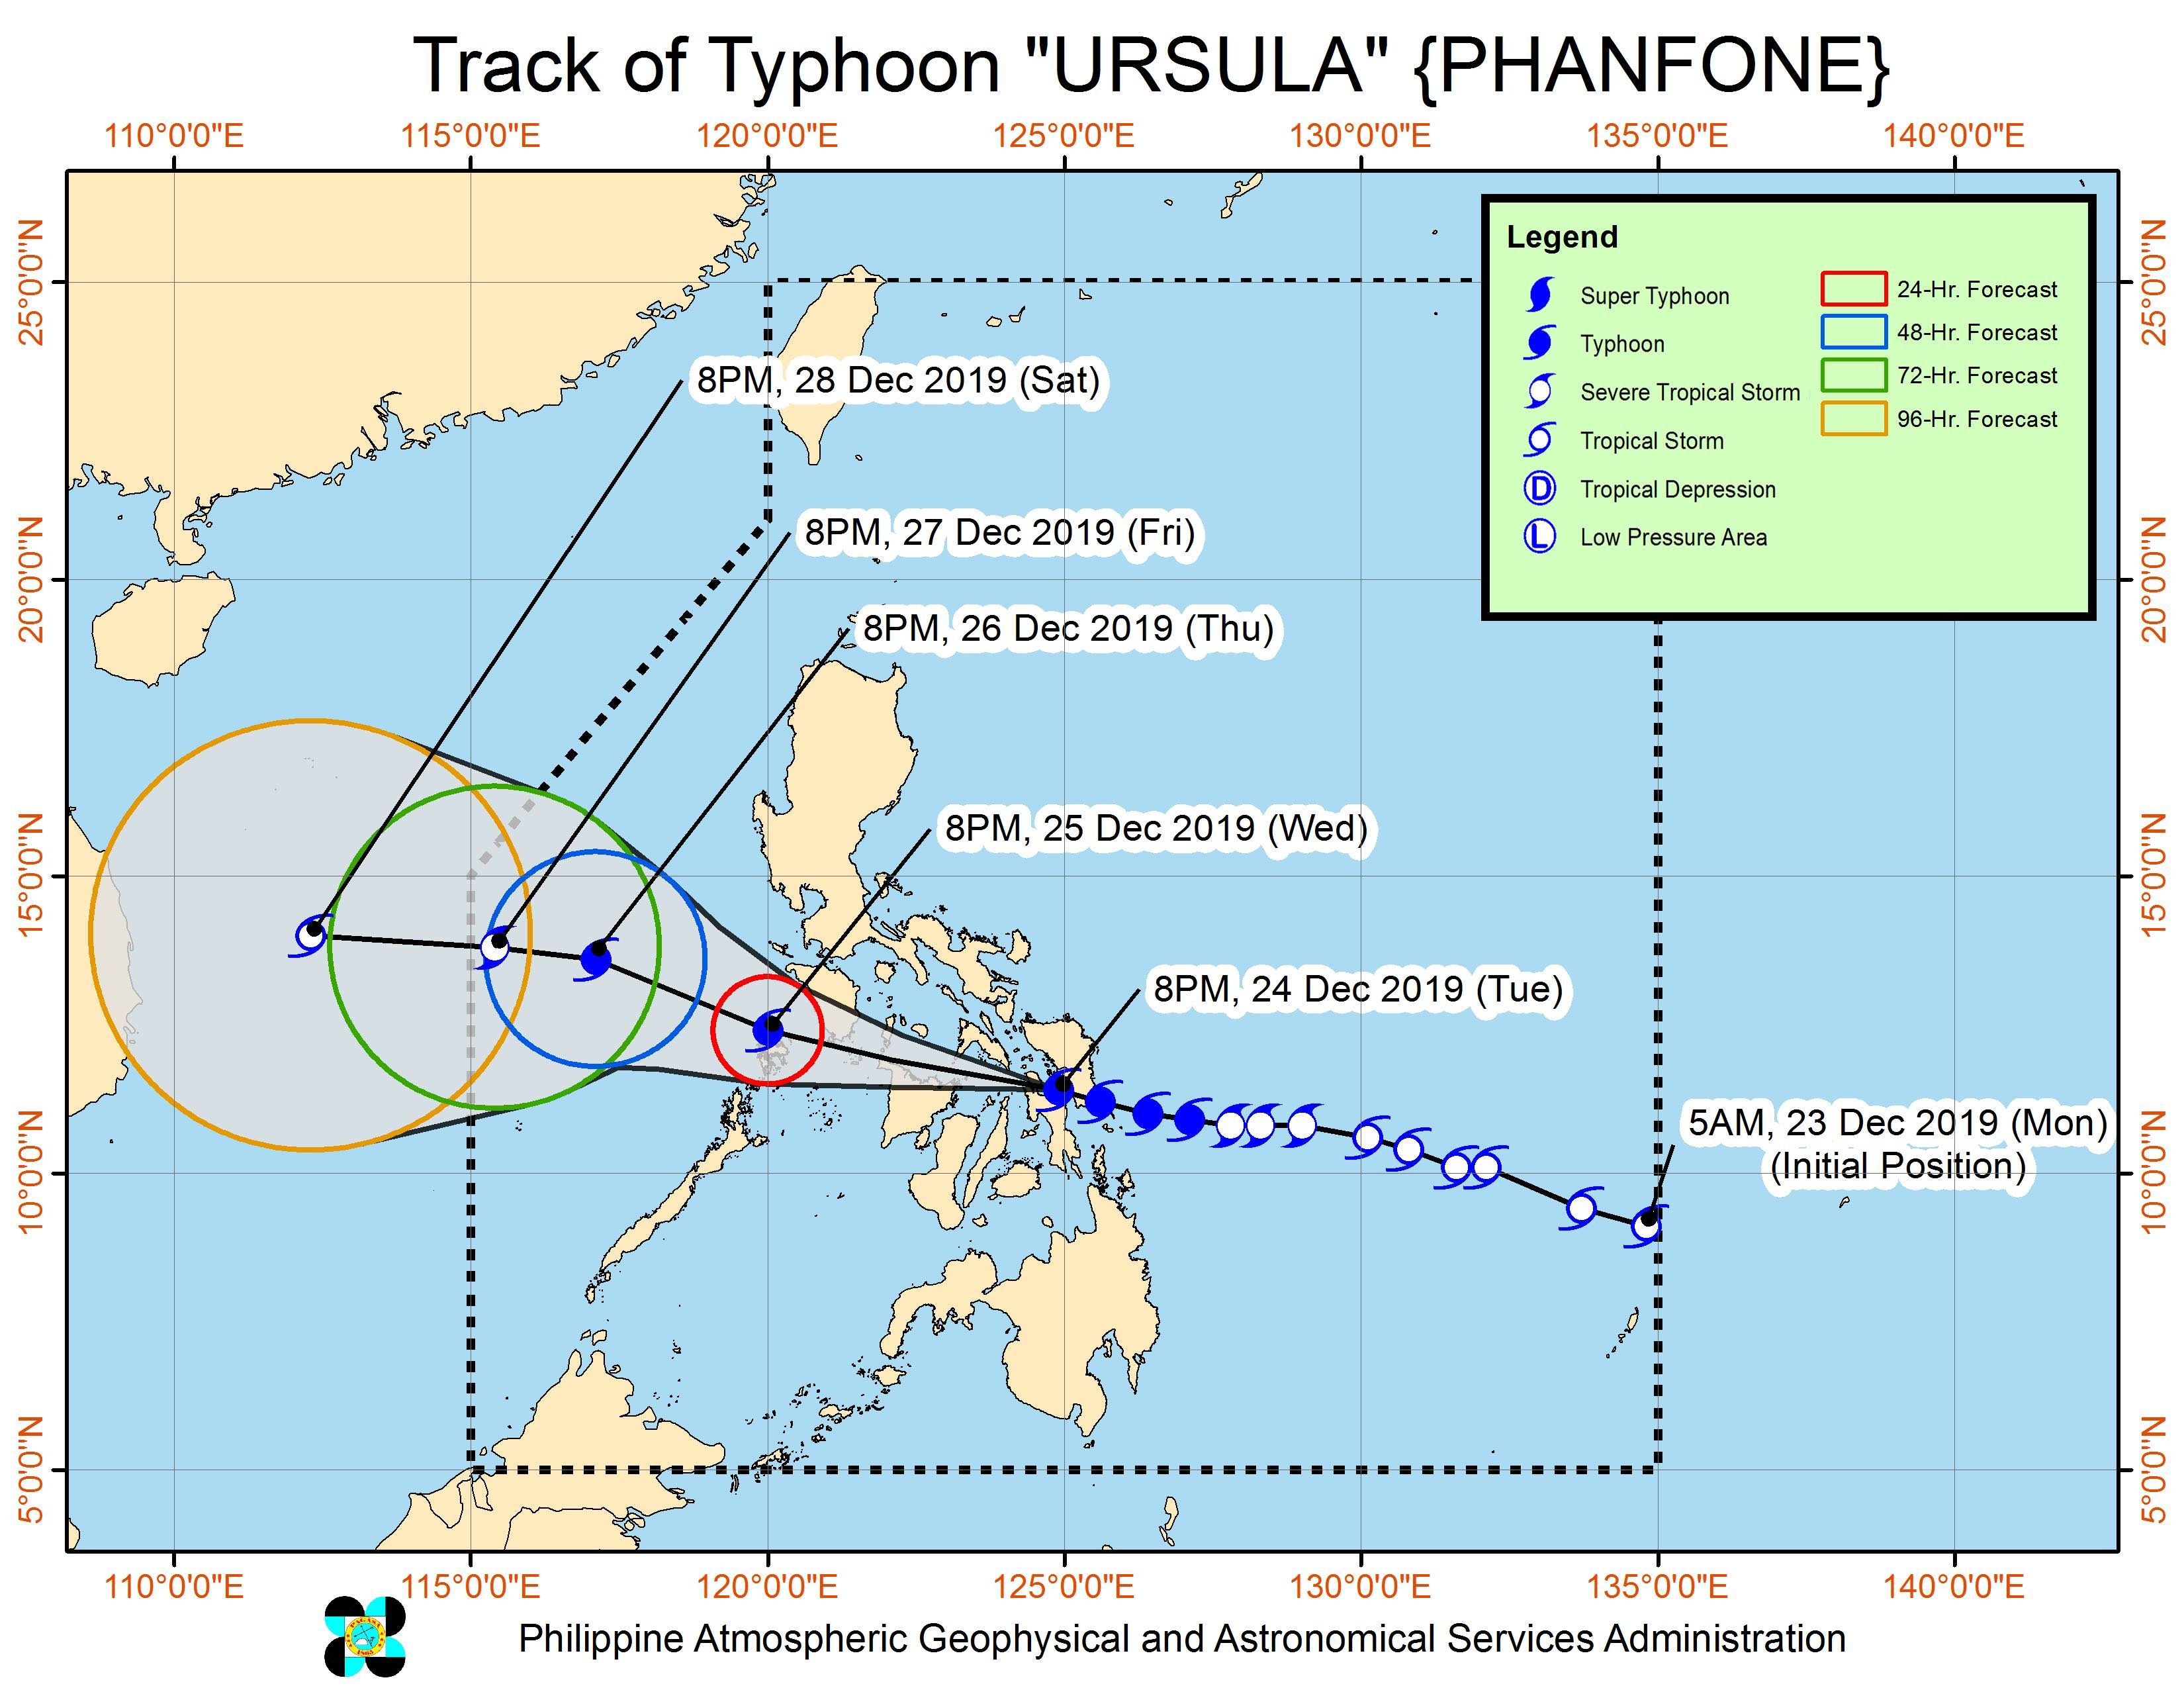 Forecast track of Typhoon Ursula (Phanfone) as of December 24, 2019, 11 pm. Image from PAGASA 